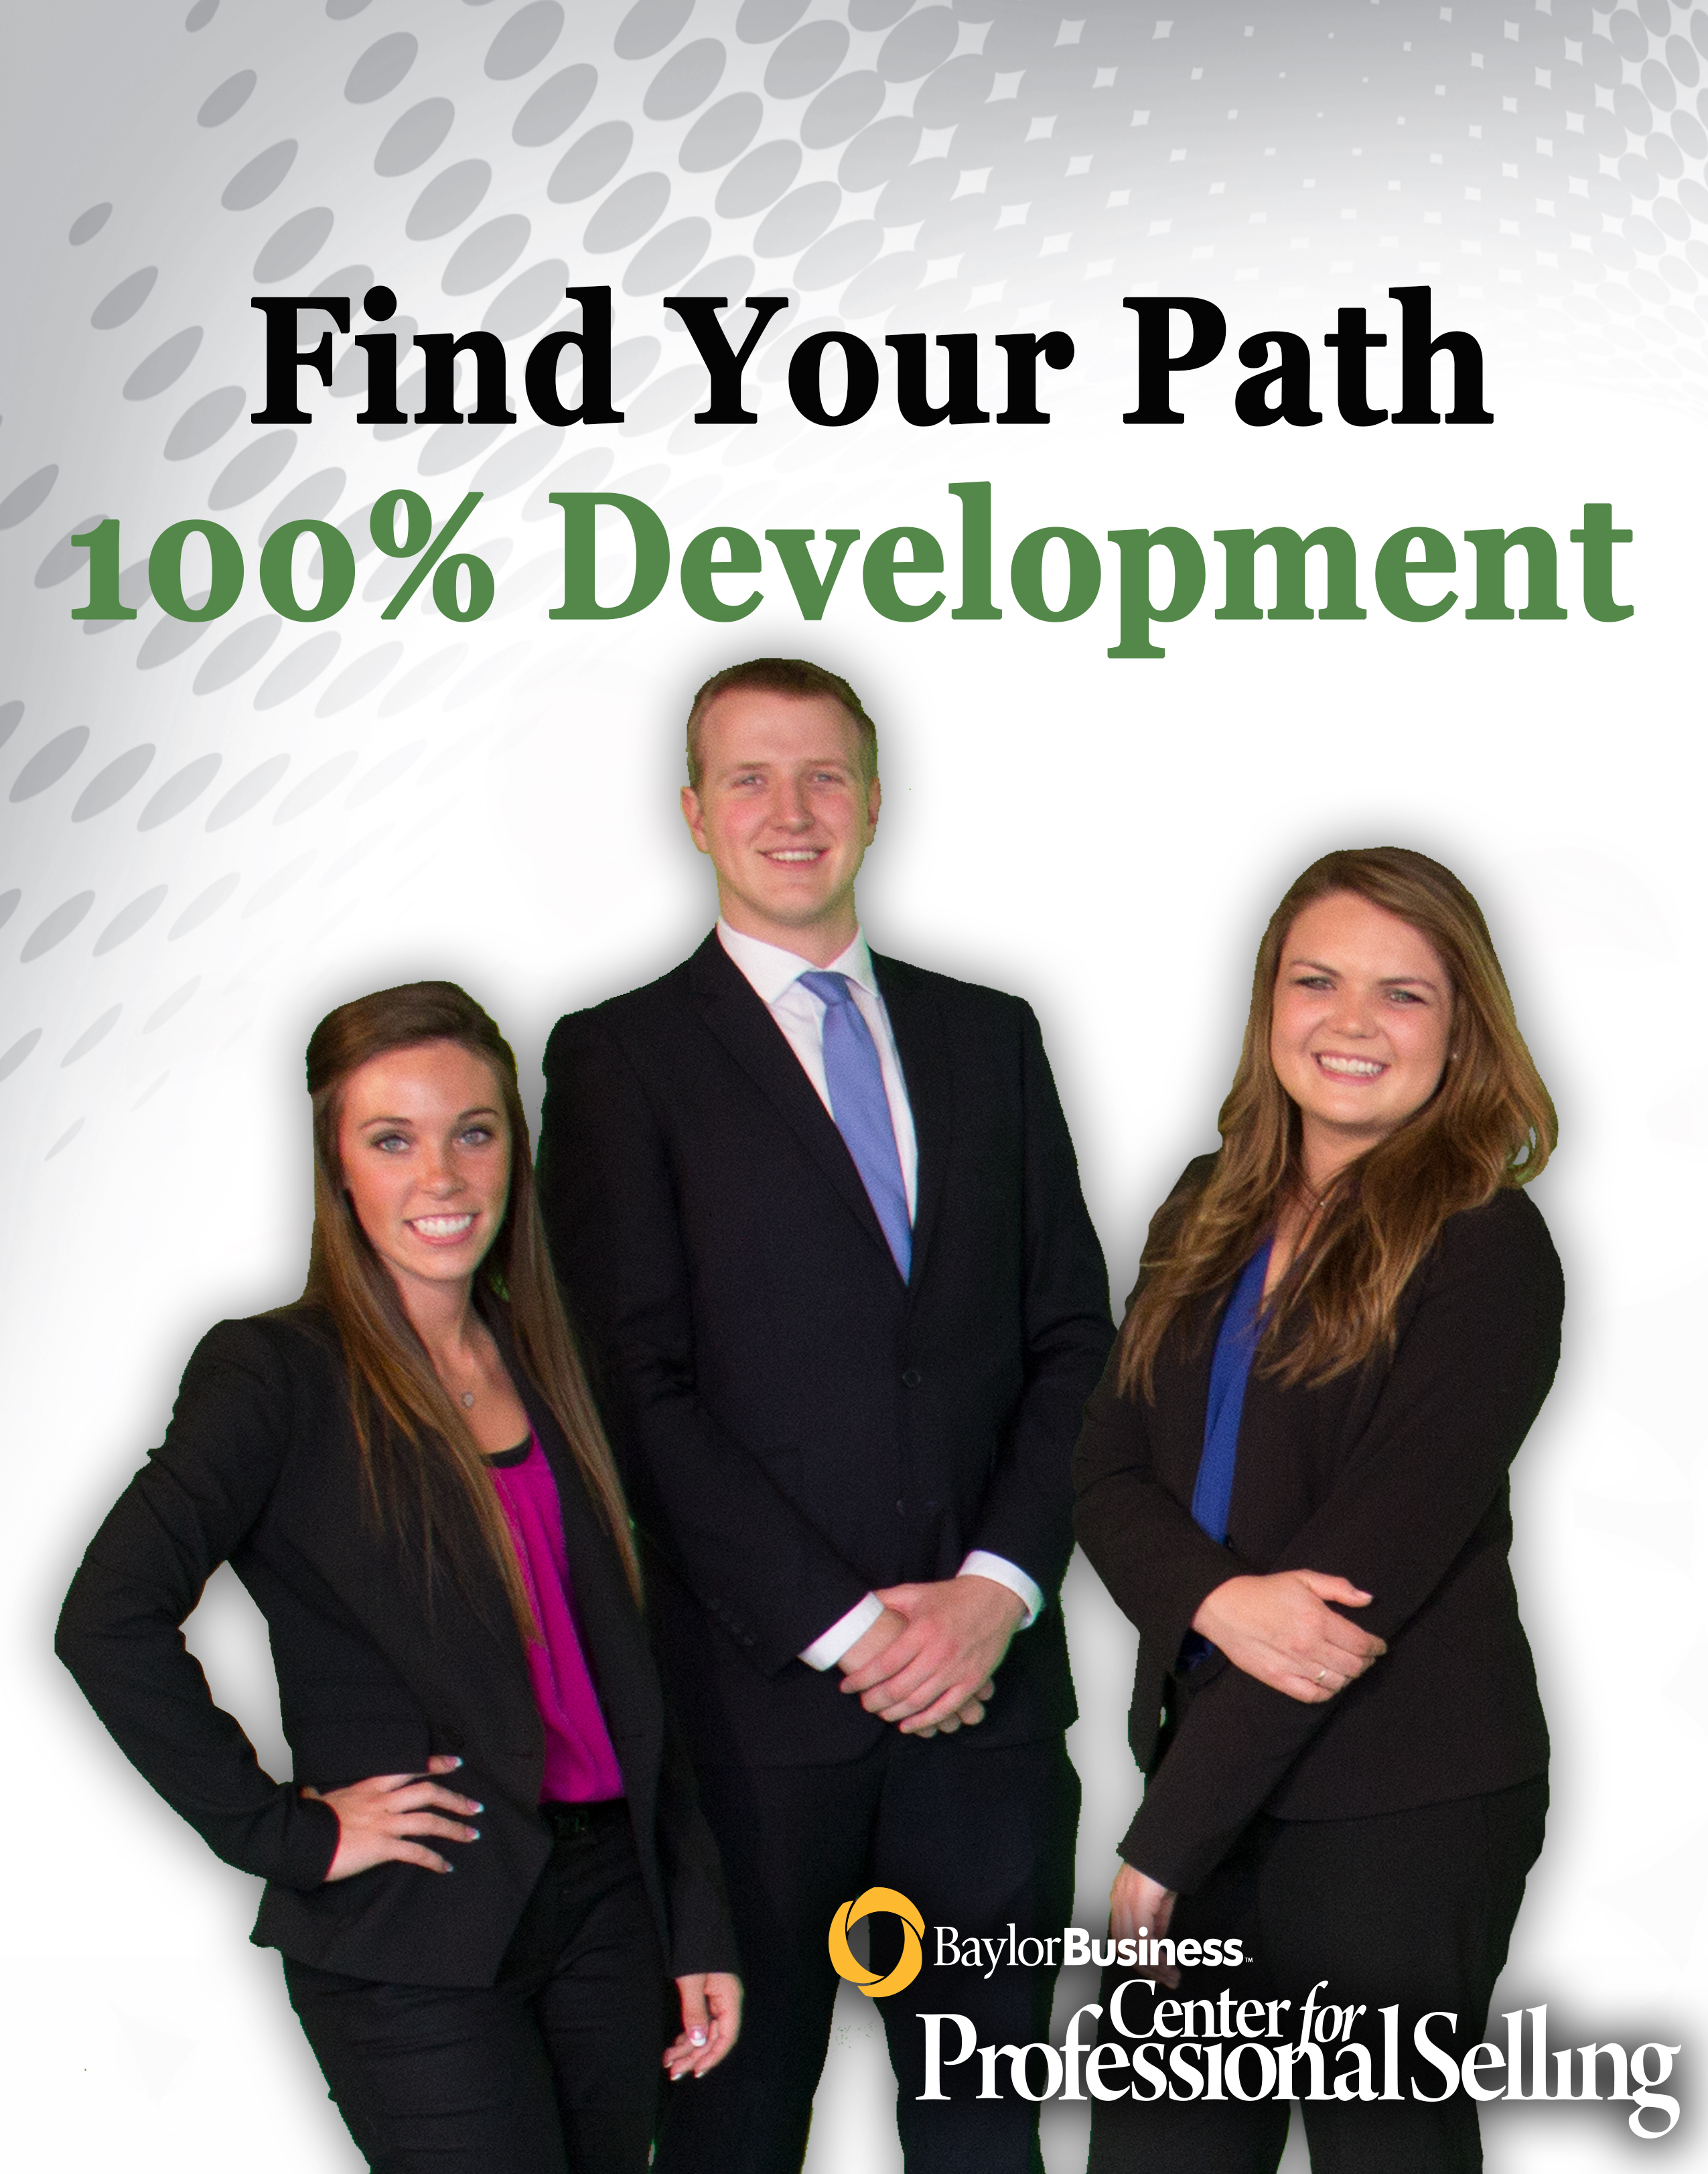 Find your path 100% Development Ad 2